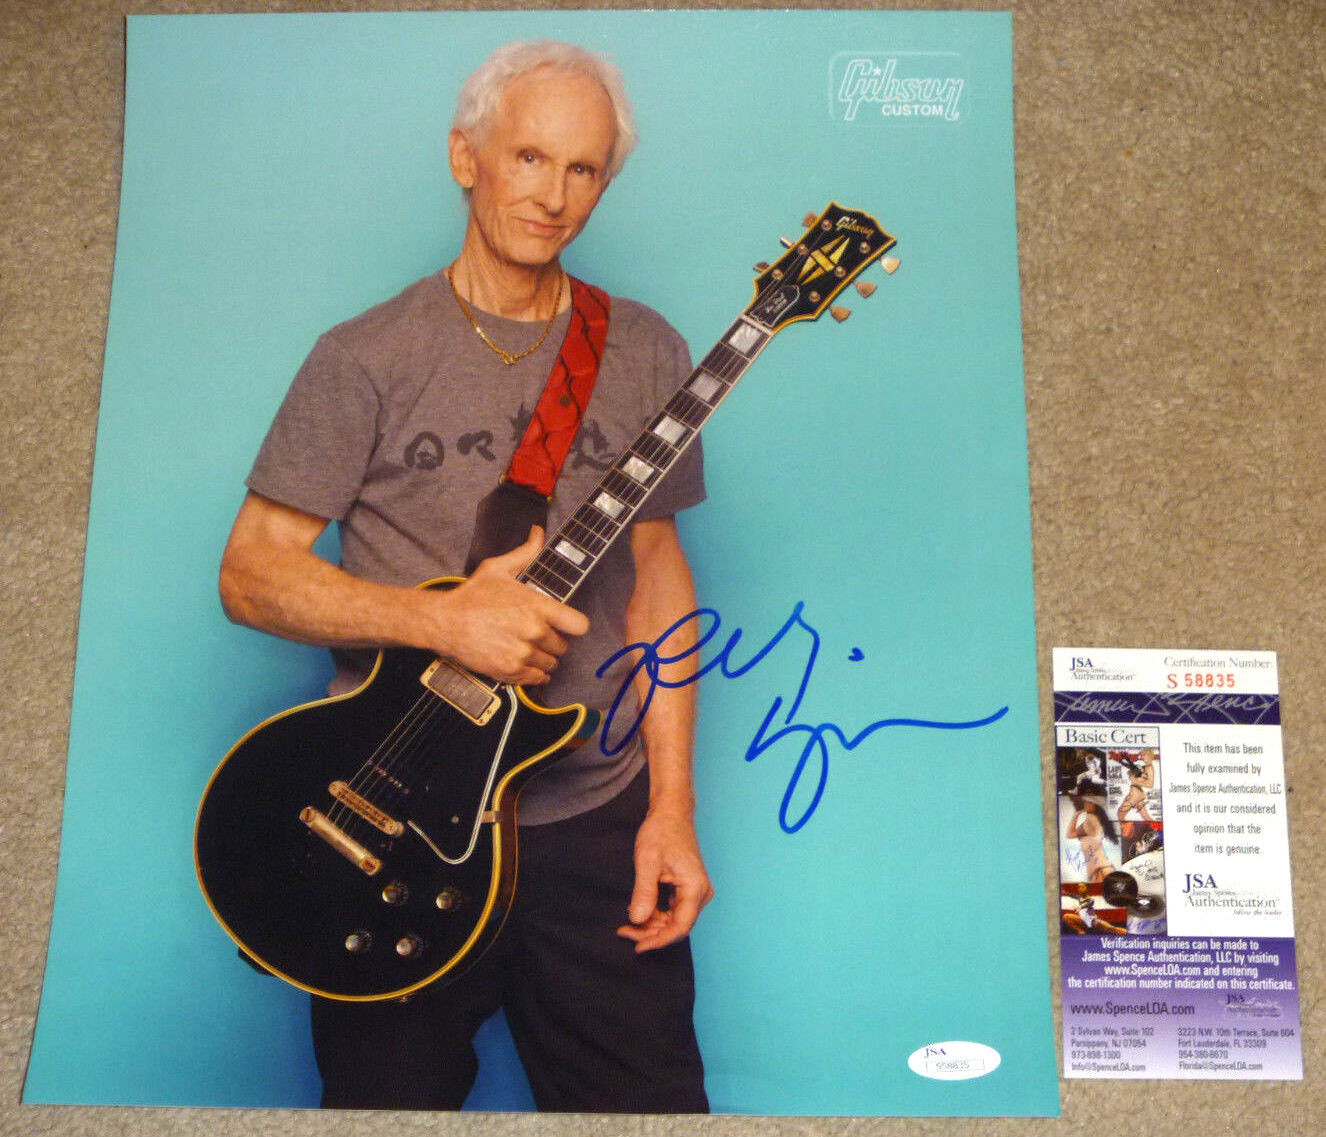 Robby Krieger Signed 11x14 Photo Poster painting Autographed, The Doors, Guitarist JSA COA